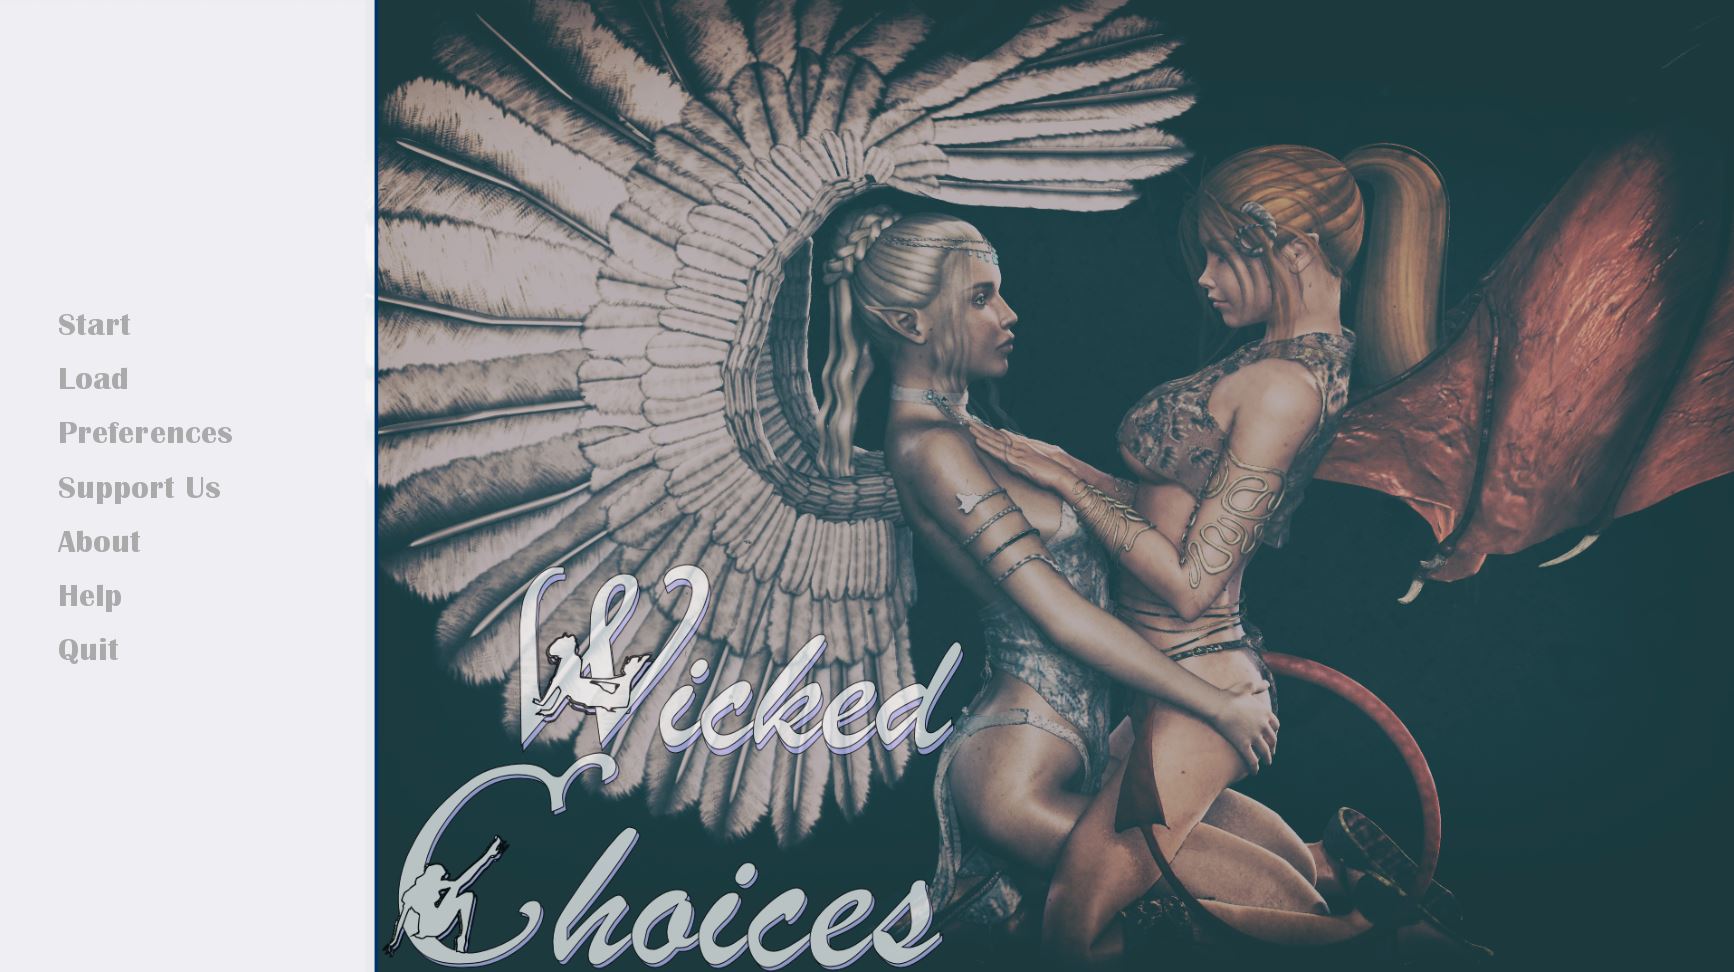 Wicked Choices – Version 1.0 - Patreon incest hentai game 5